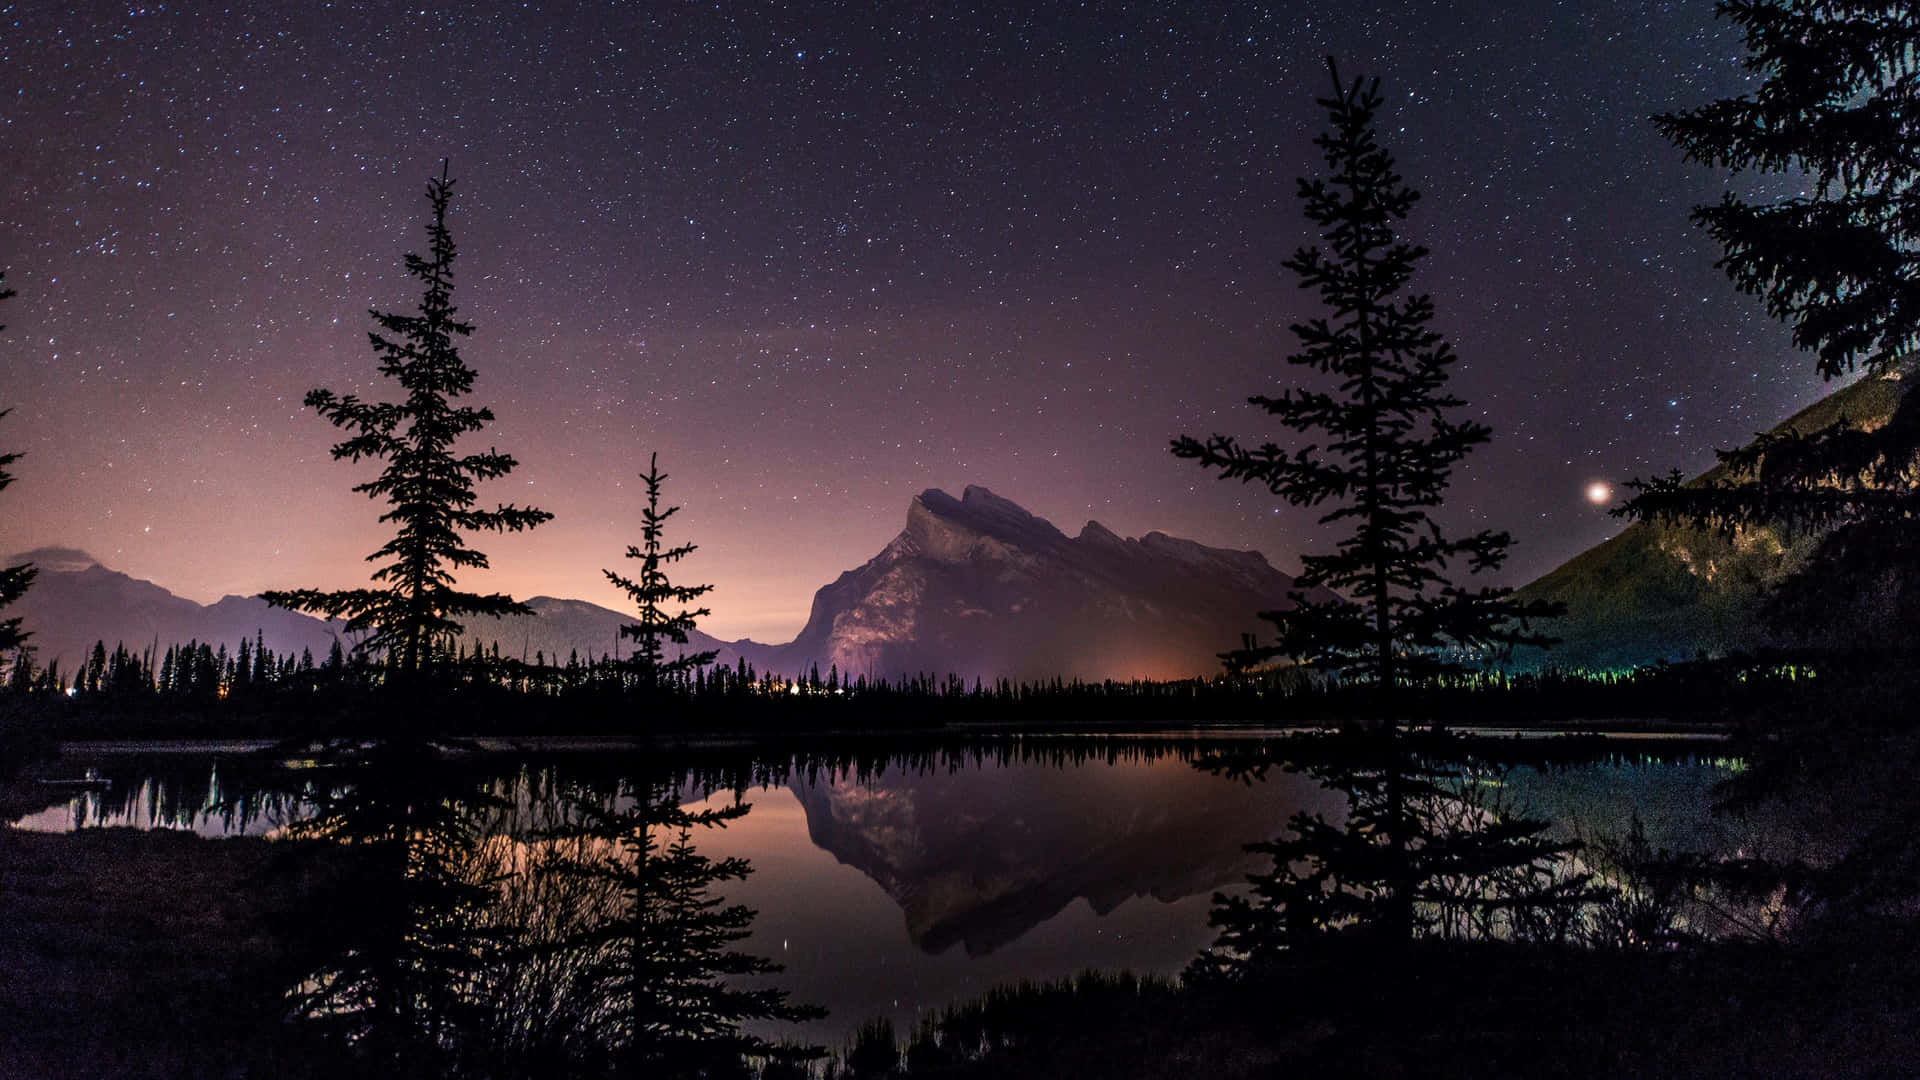 A Mountain Range Is Reflected In A Lake At Night